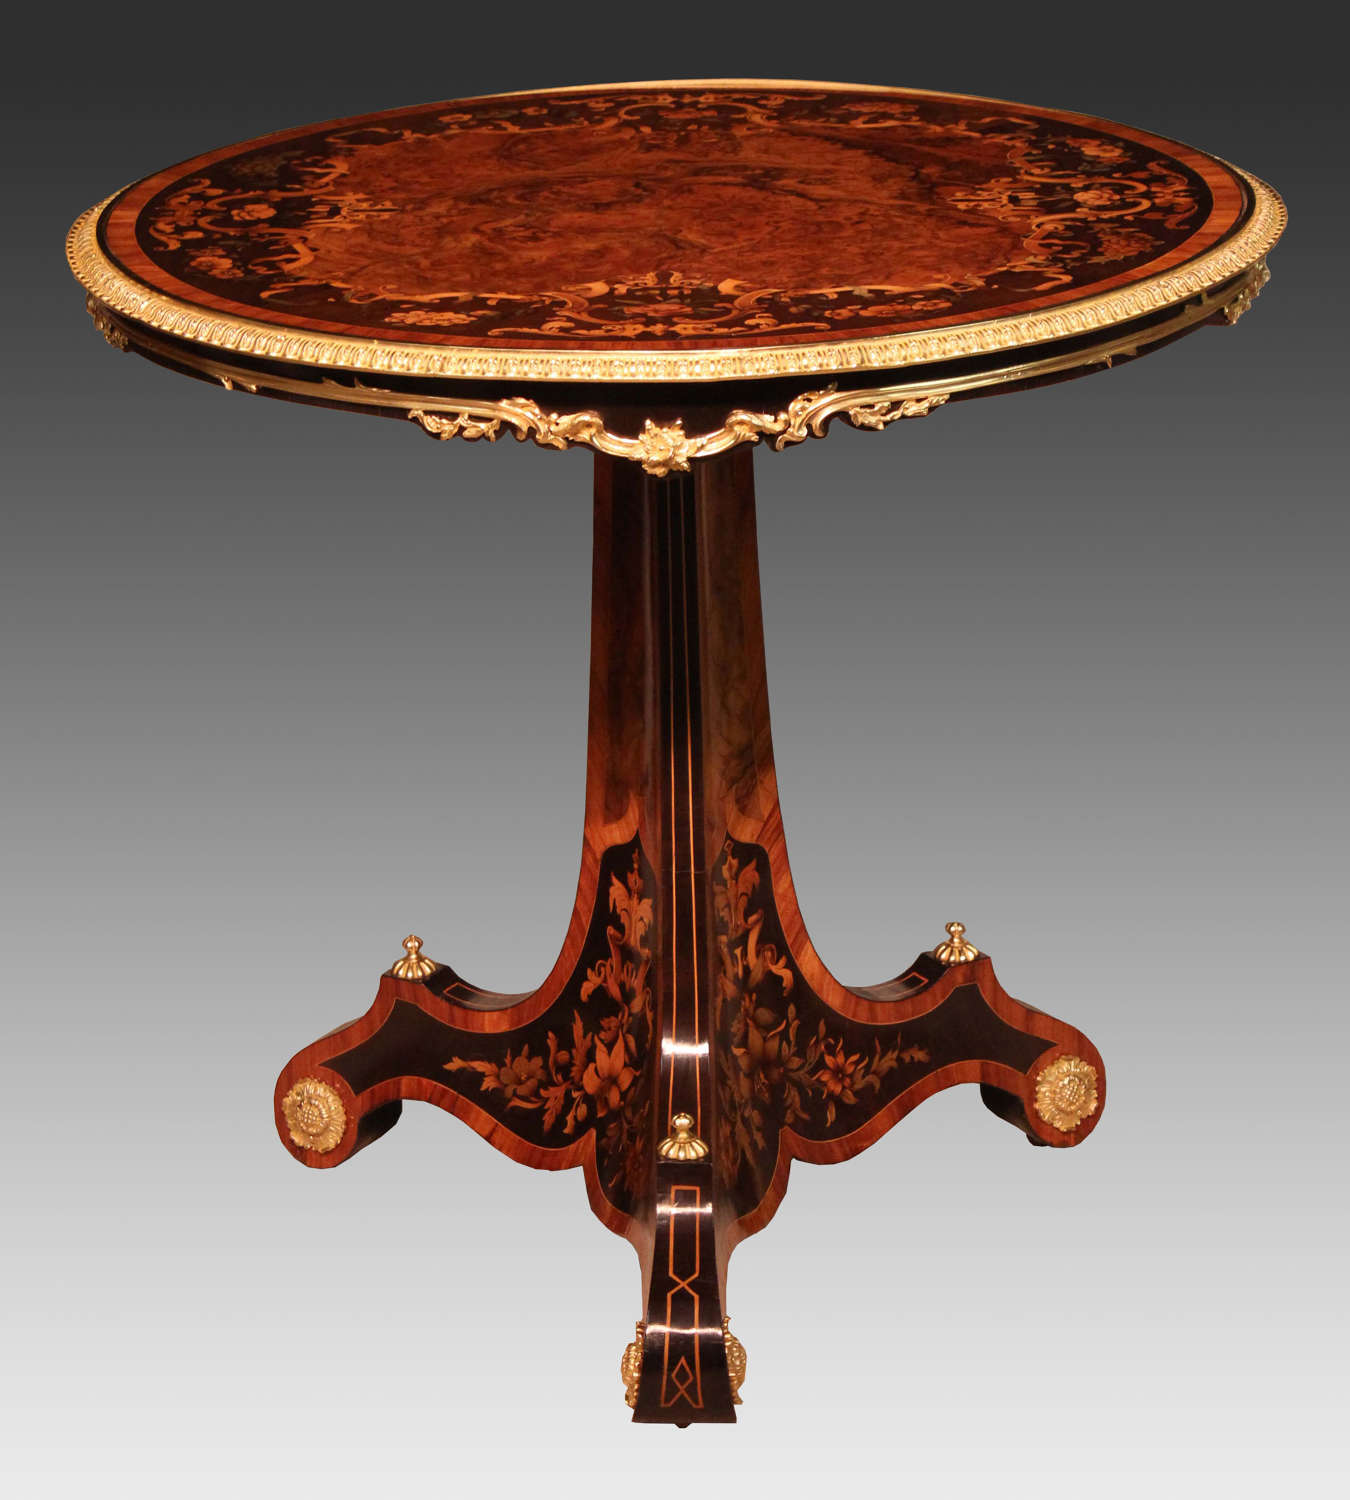 An Exceptional Inlaid Walnut and Kingwood Marquetry Centre Table